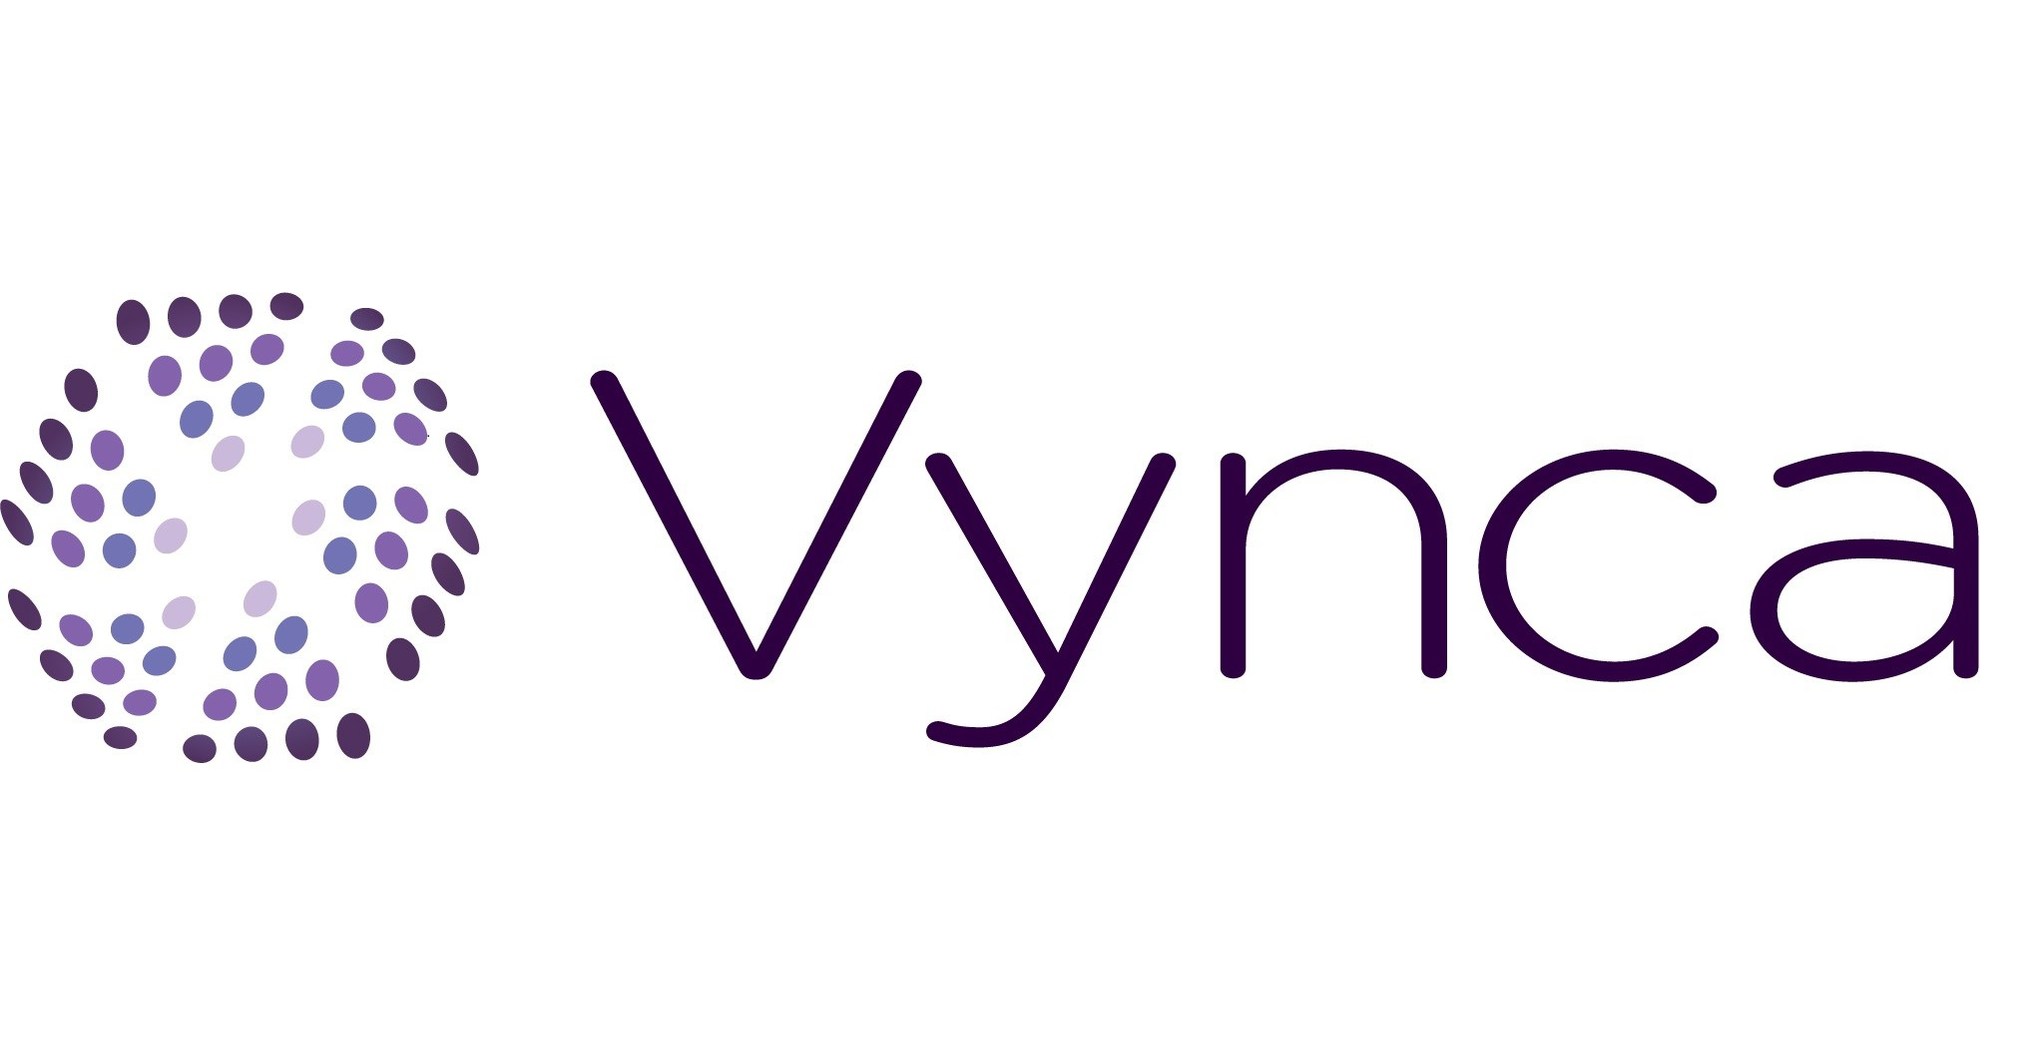 Vynca and Intermountain Healthcare Partner to Prioritize and Digitize Advance Care Planning